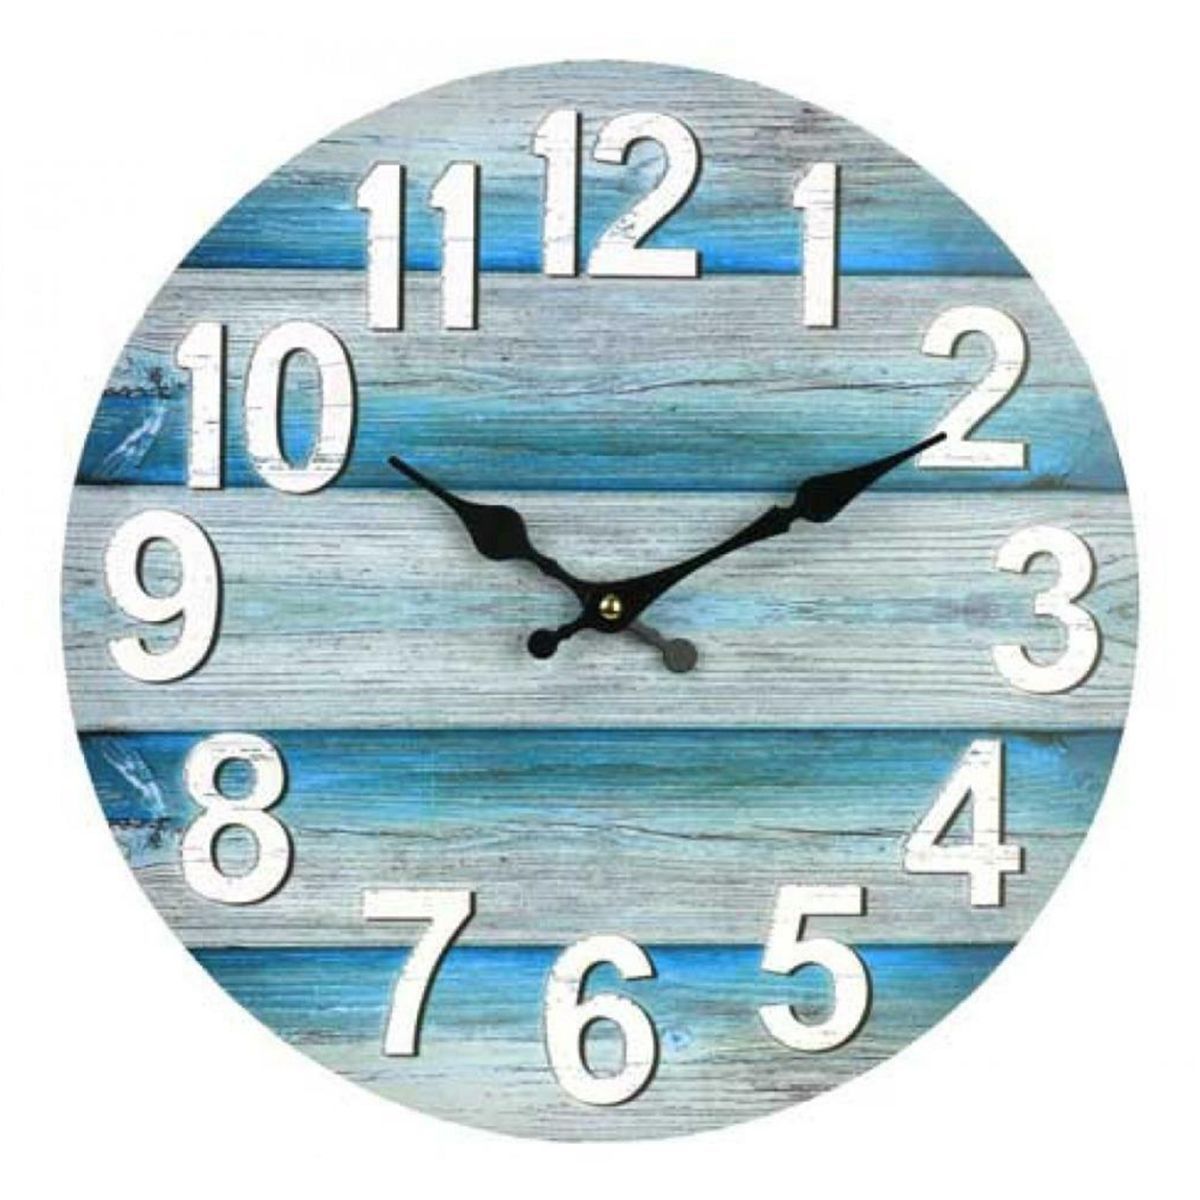 13-Inch-Wall-Clock-Round-Silent-Vintage-Beach-Ocean-Style-Clock-Home-Room-Decoration-1447233